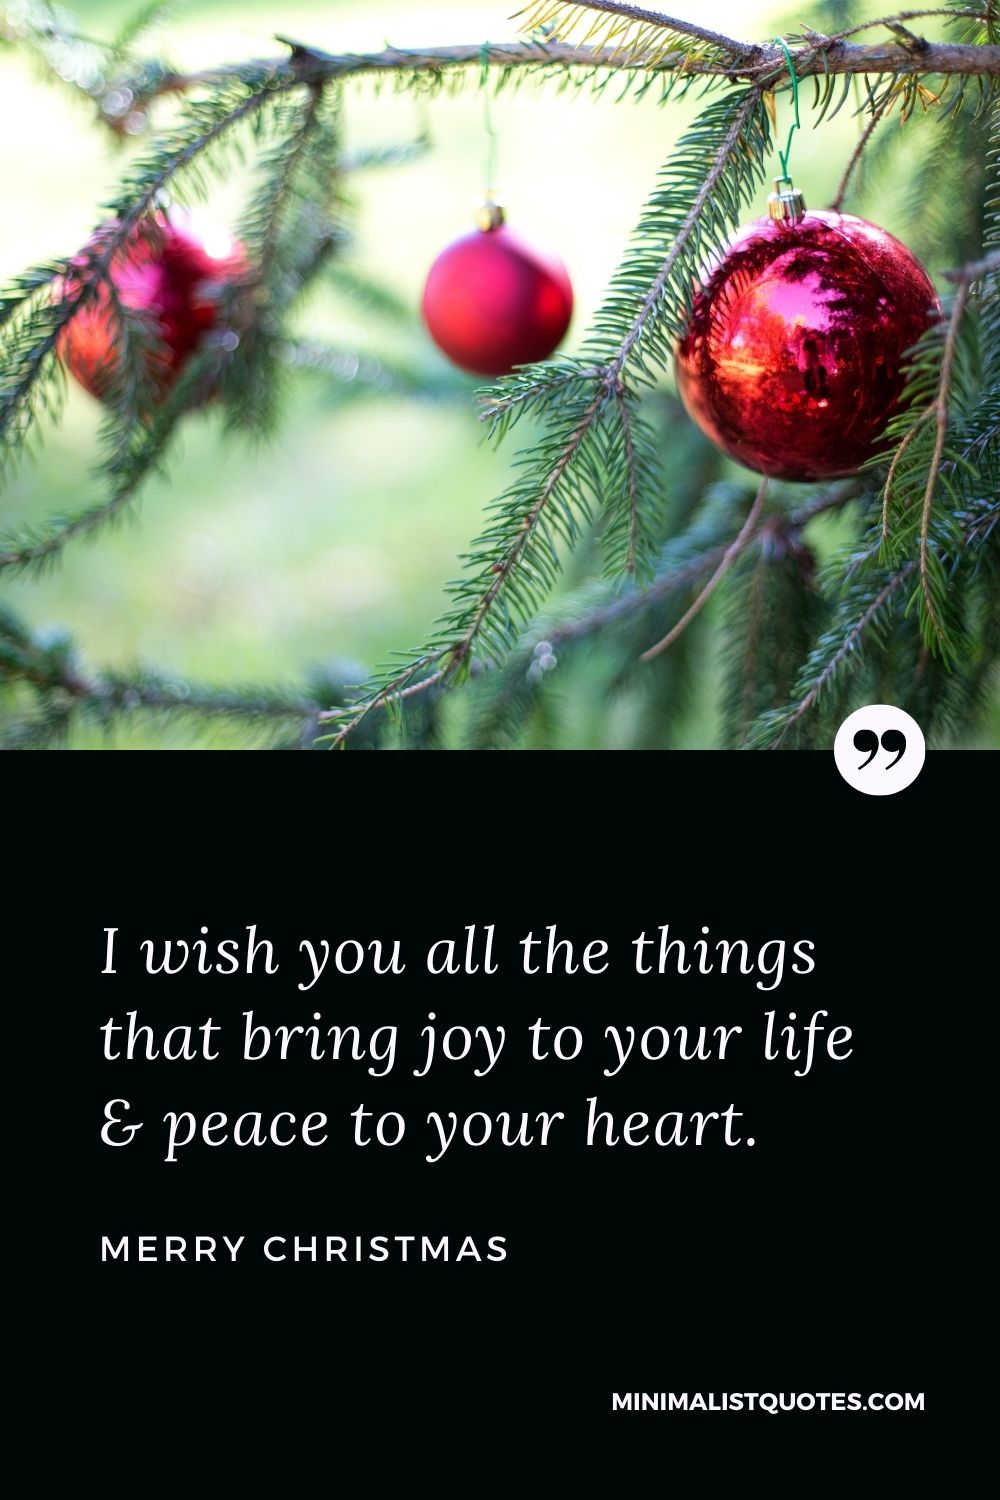 Merry Christmas Wish - I wish you all the things that bring joy to your life & peace to your heart.